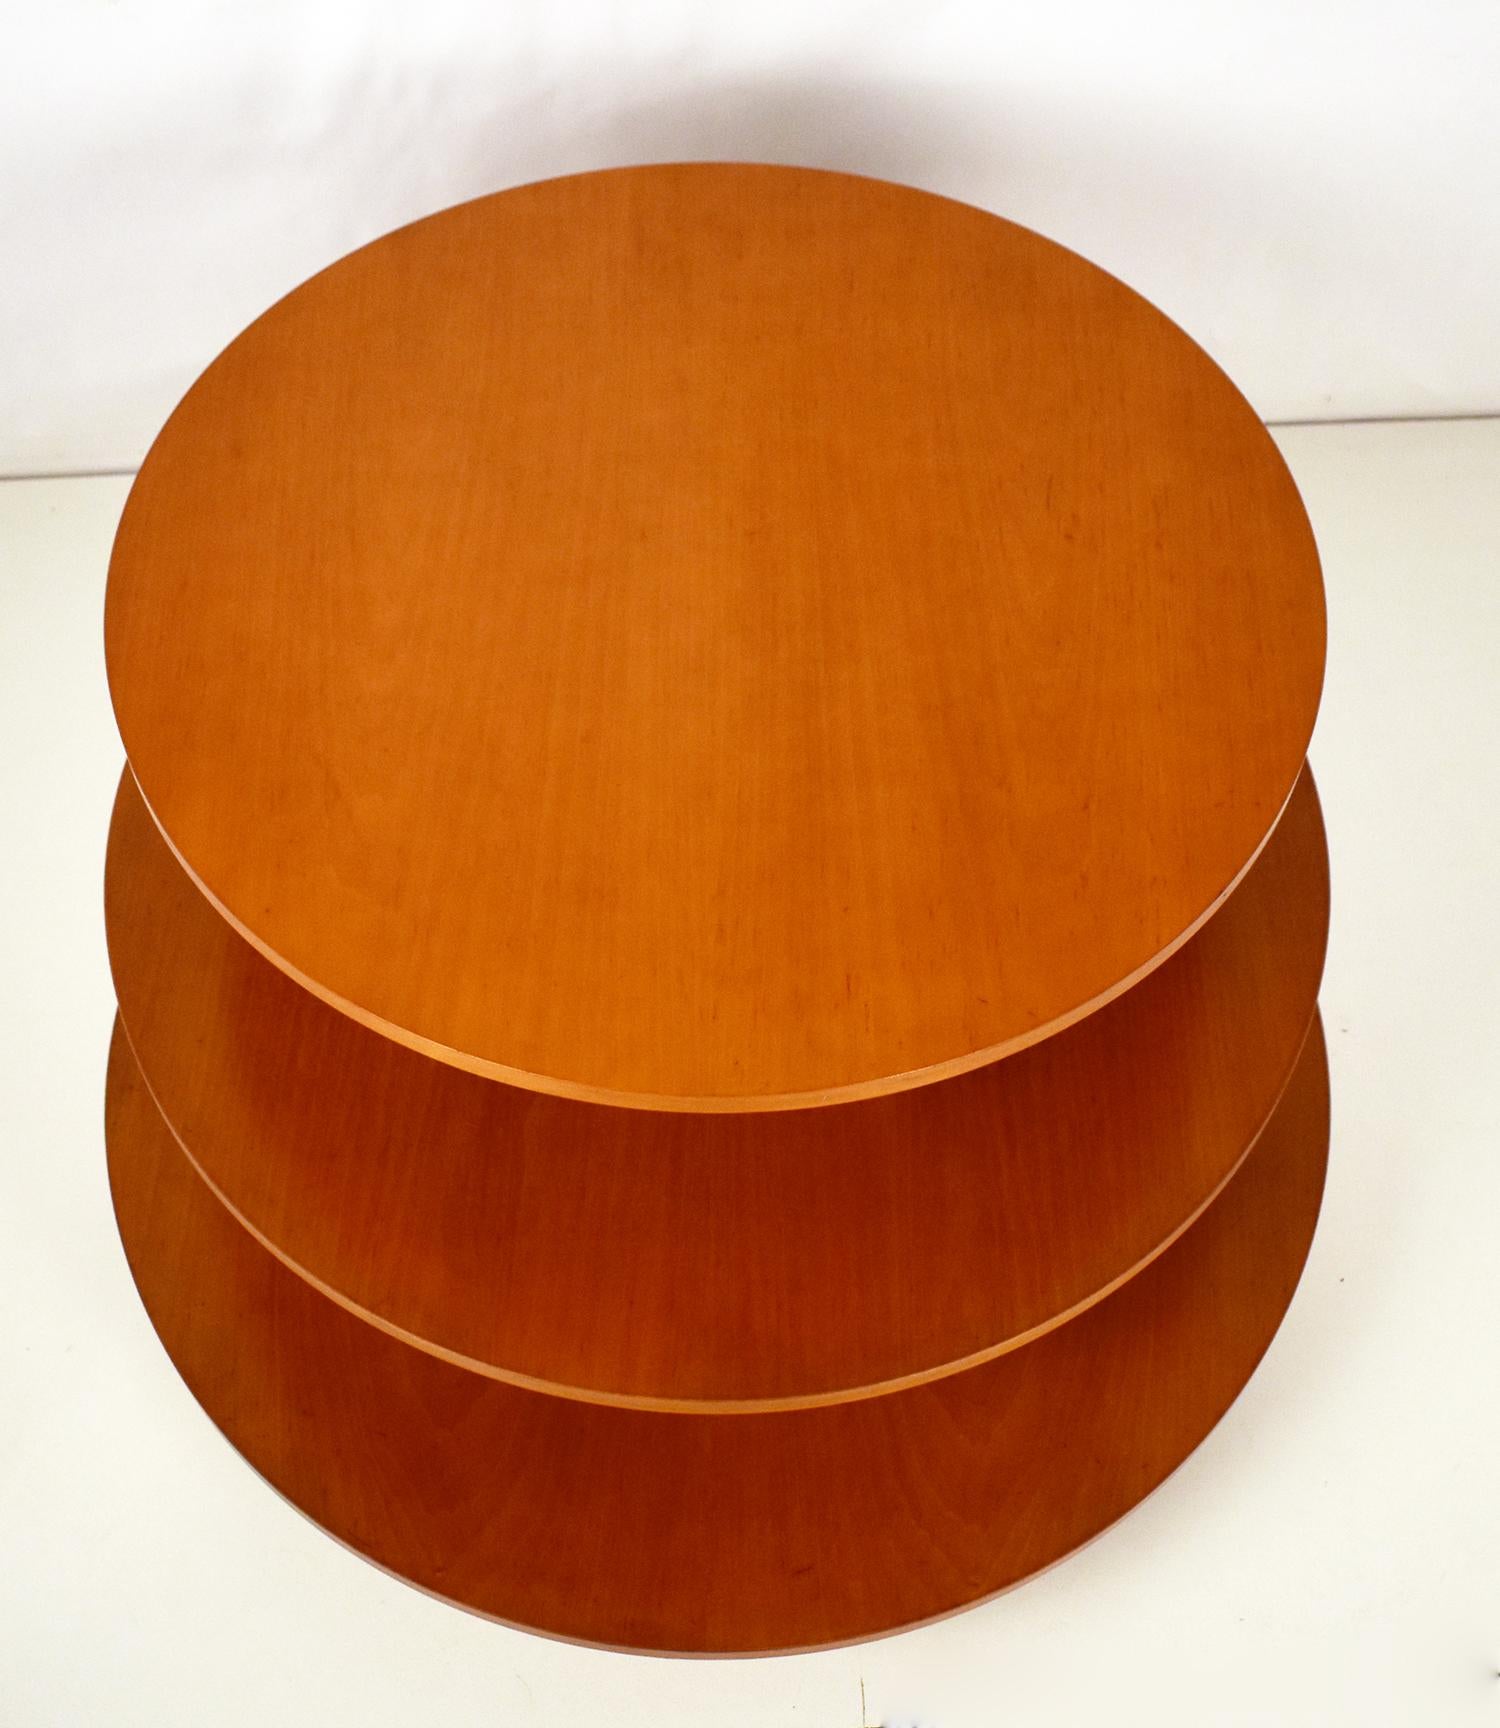 Novocomun table originally designed by the italian architect Giuseppe Terragni in 1929 for the headquarters of the Federazione degli Agricultori in the Novocomun building in Como, Italy. This is an edition from 1990's from BD Barcelona in wood.
It